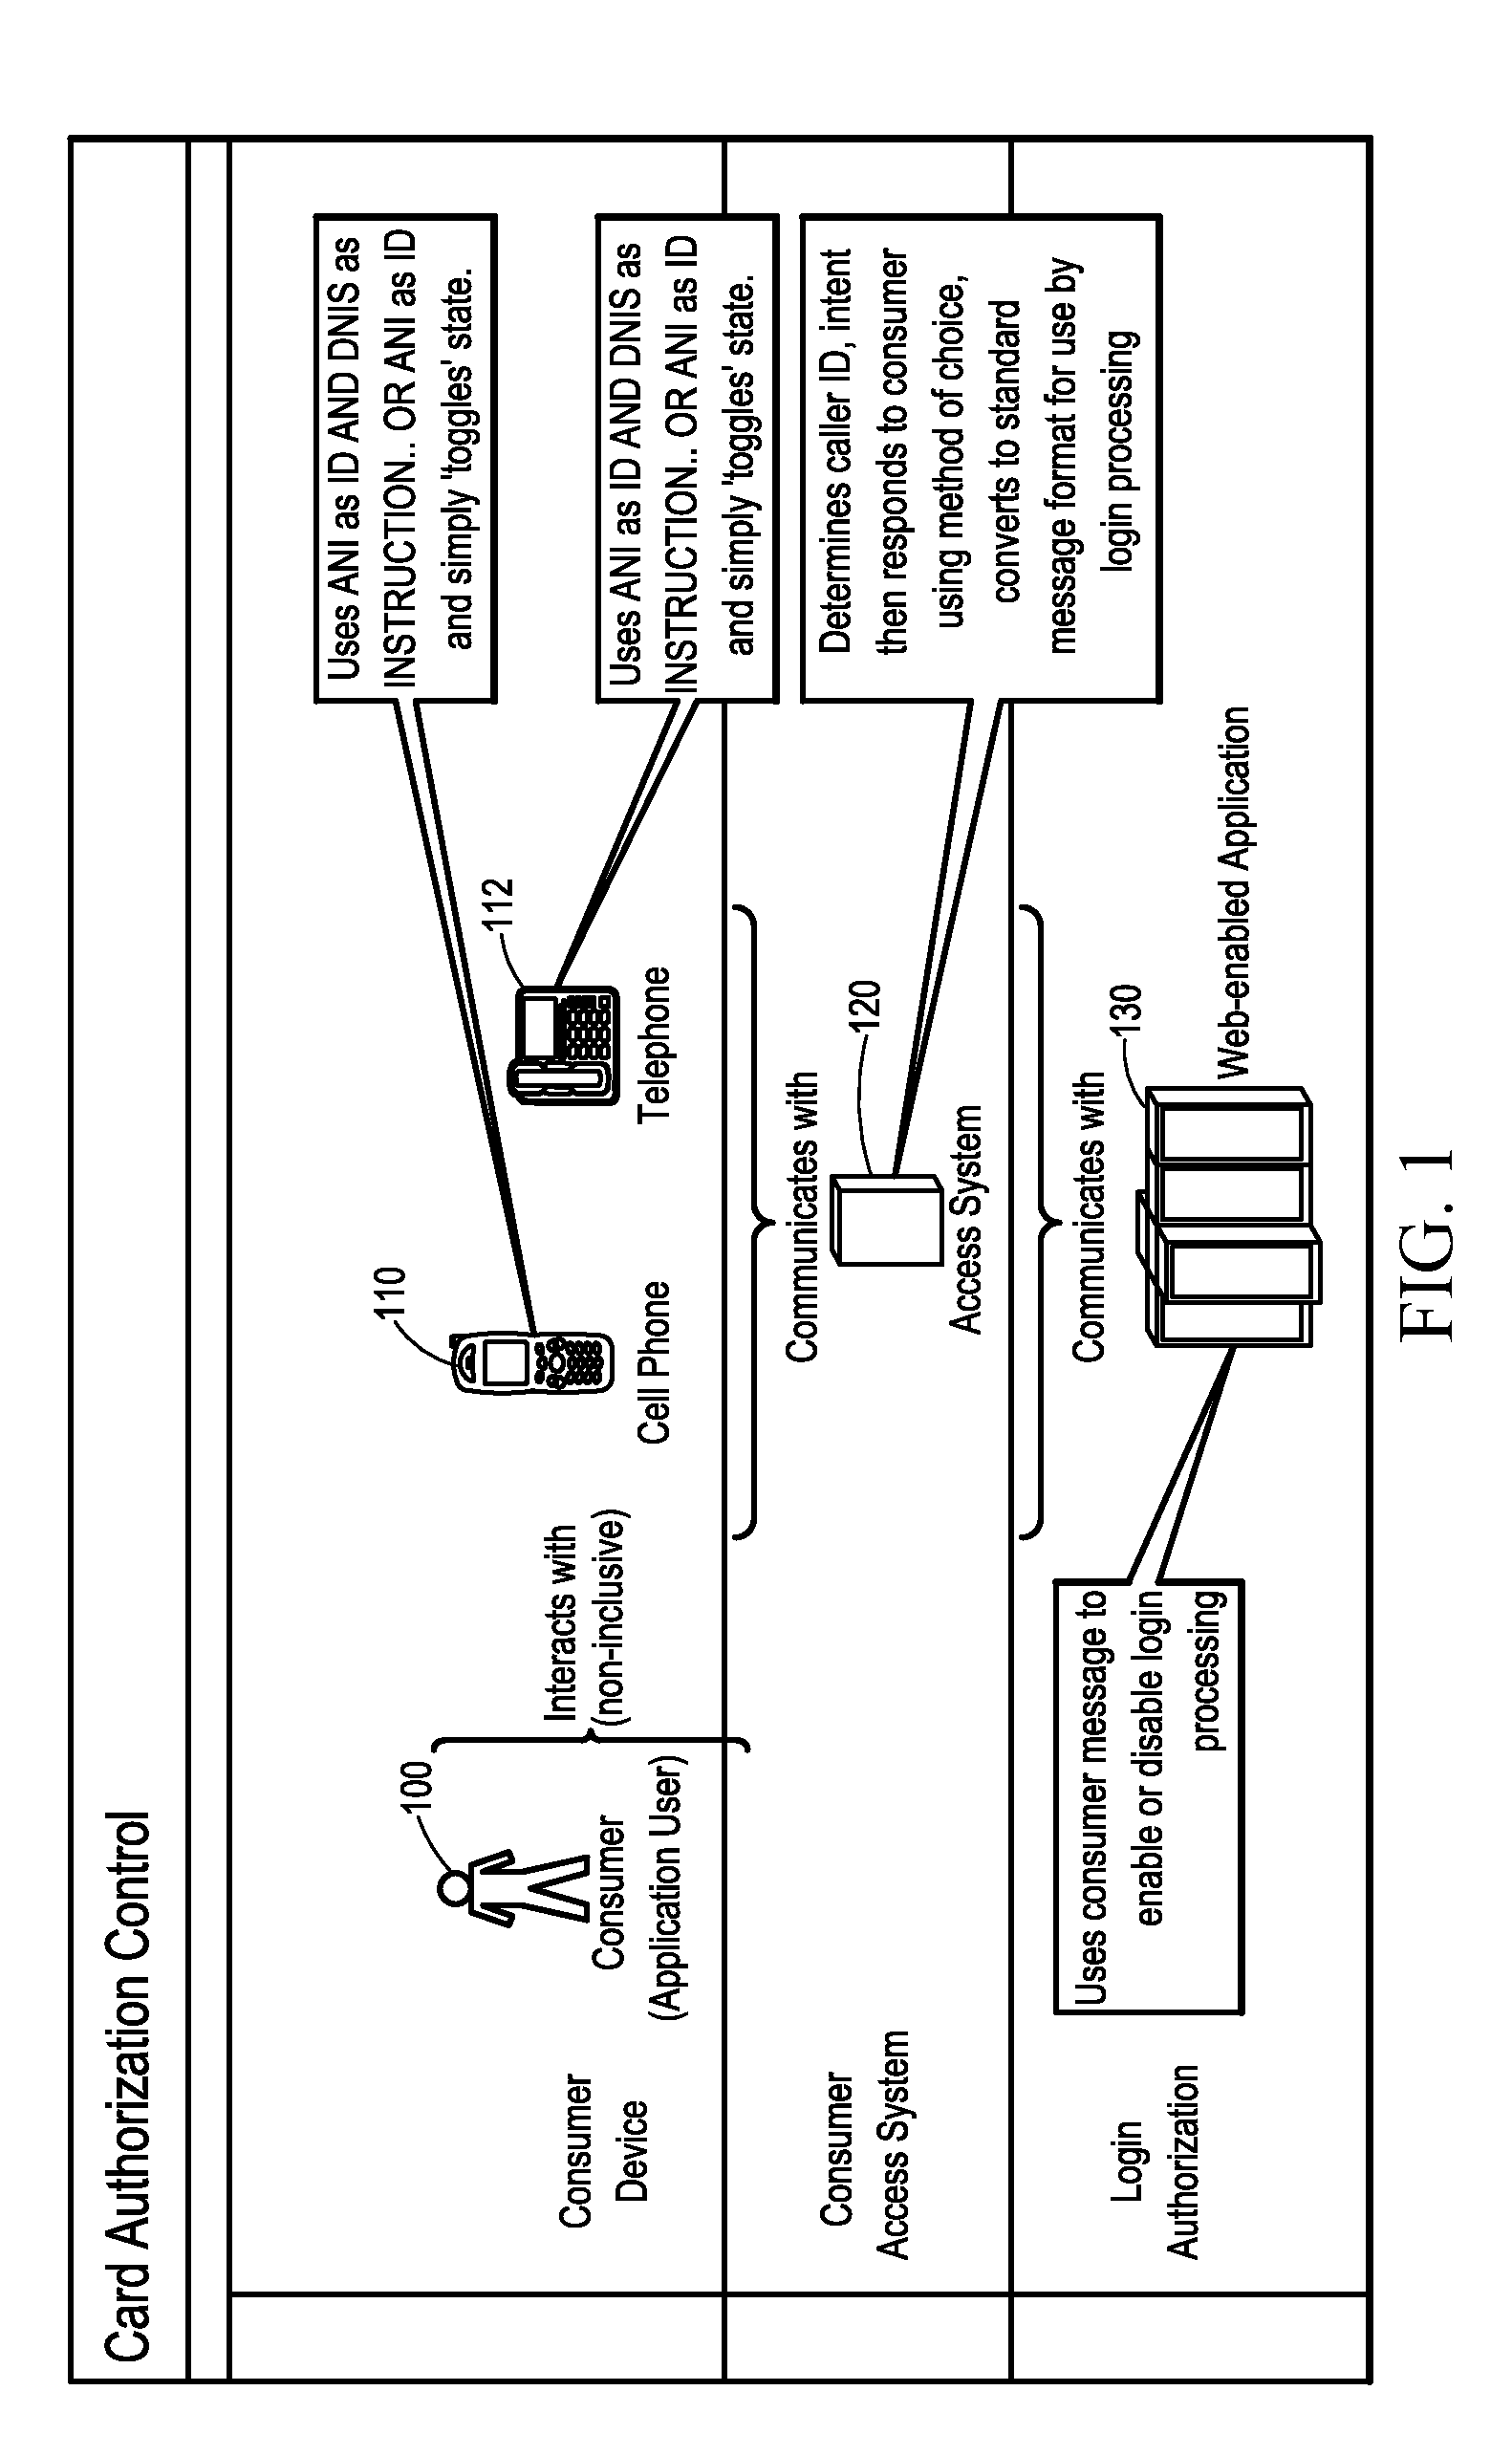 Systems and methods for user interface control